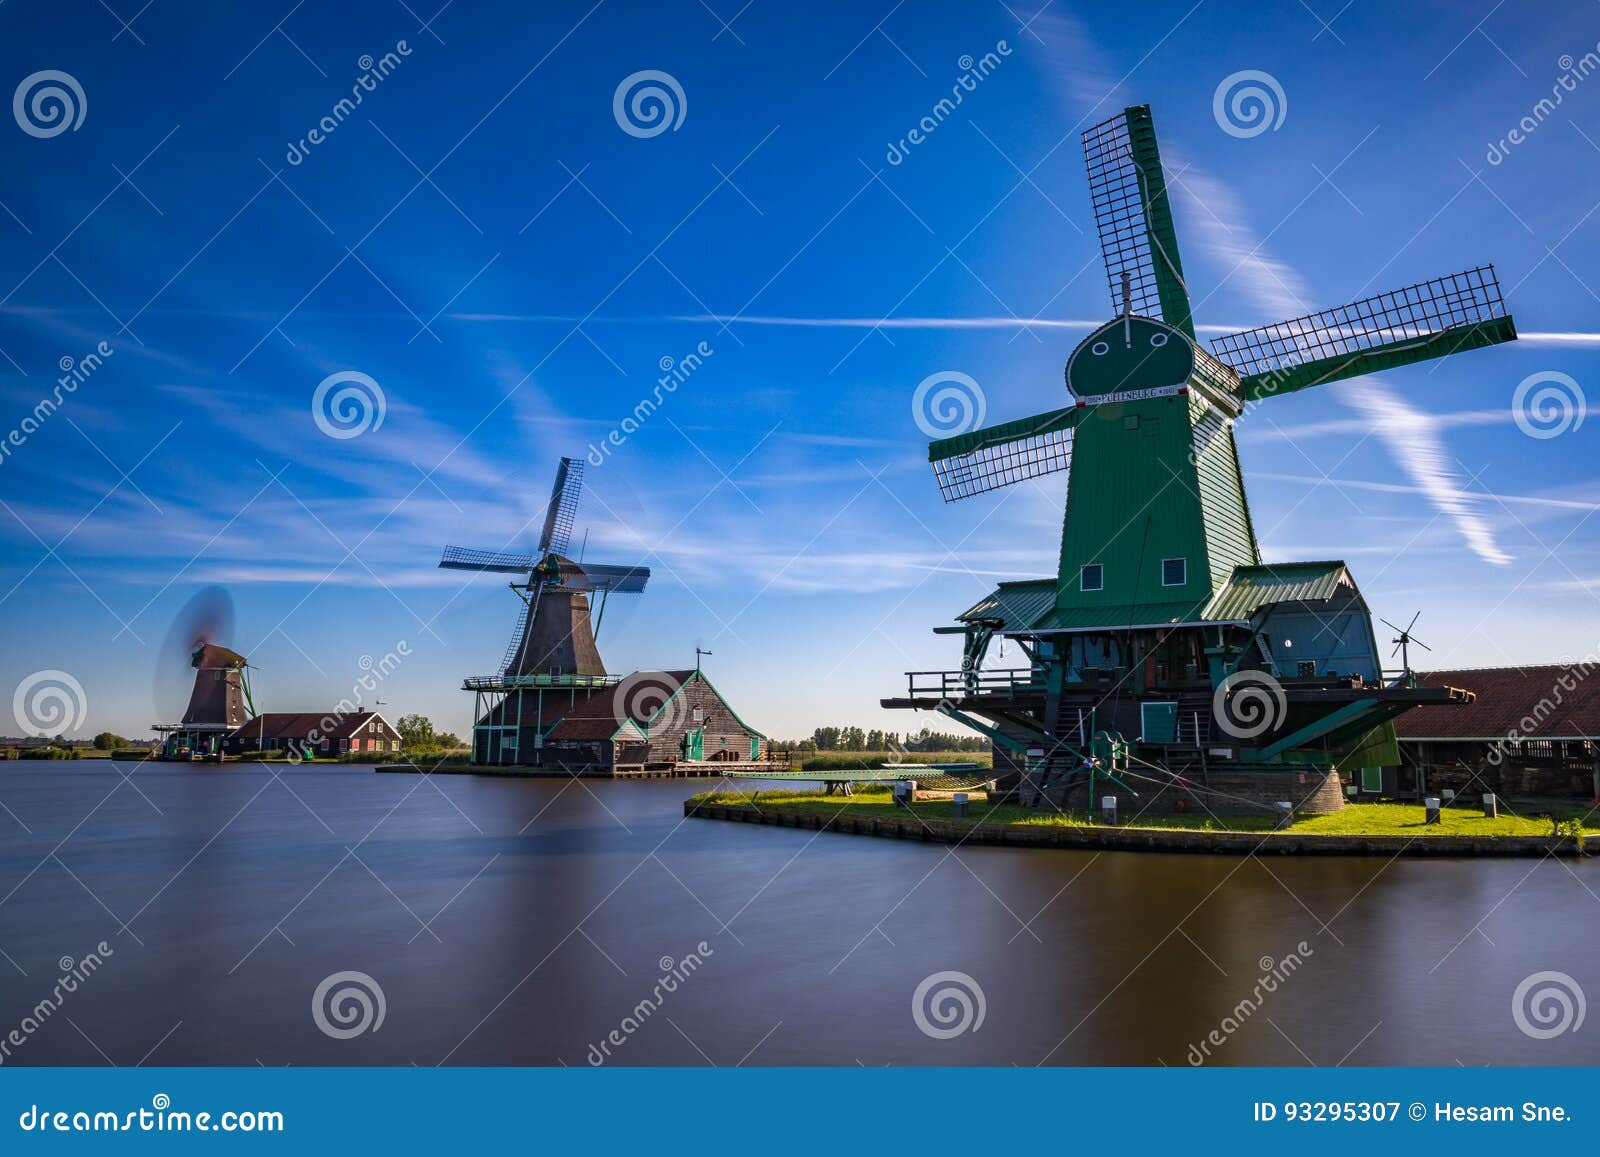 Tourist Attractions In Holland